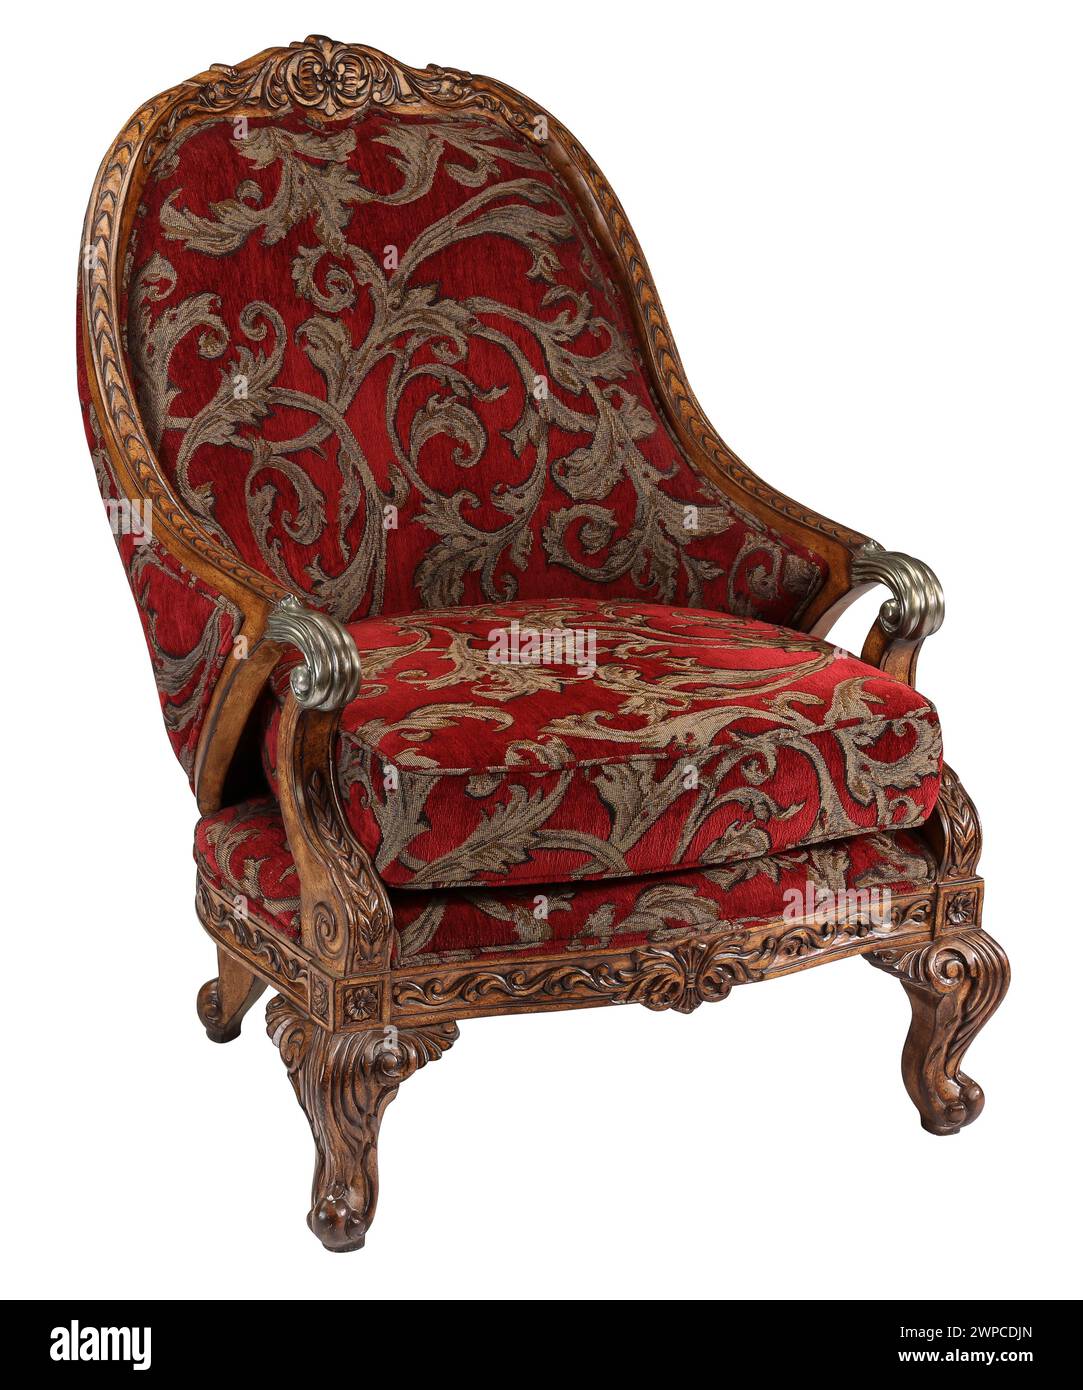 Upholstered arm chair red pattern with clipping path. Stock Photo